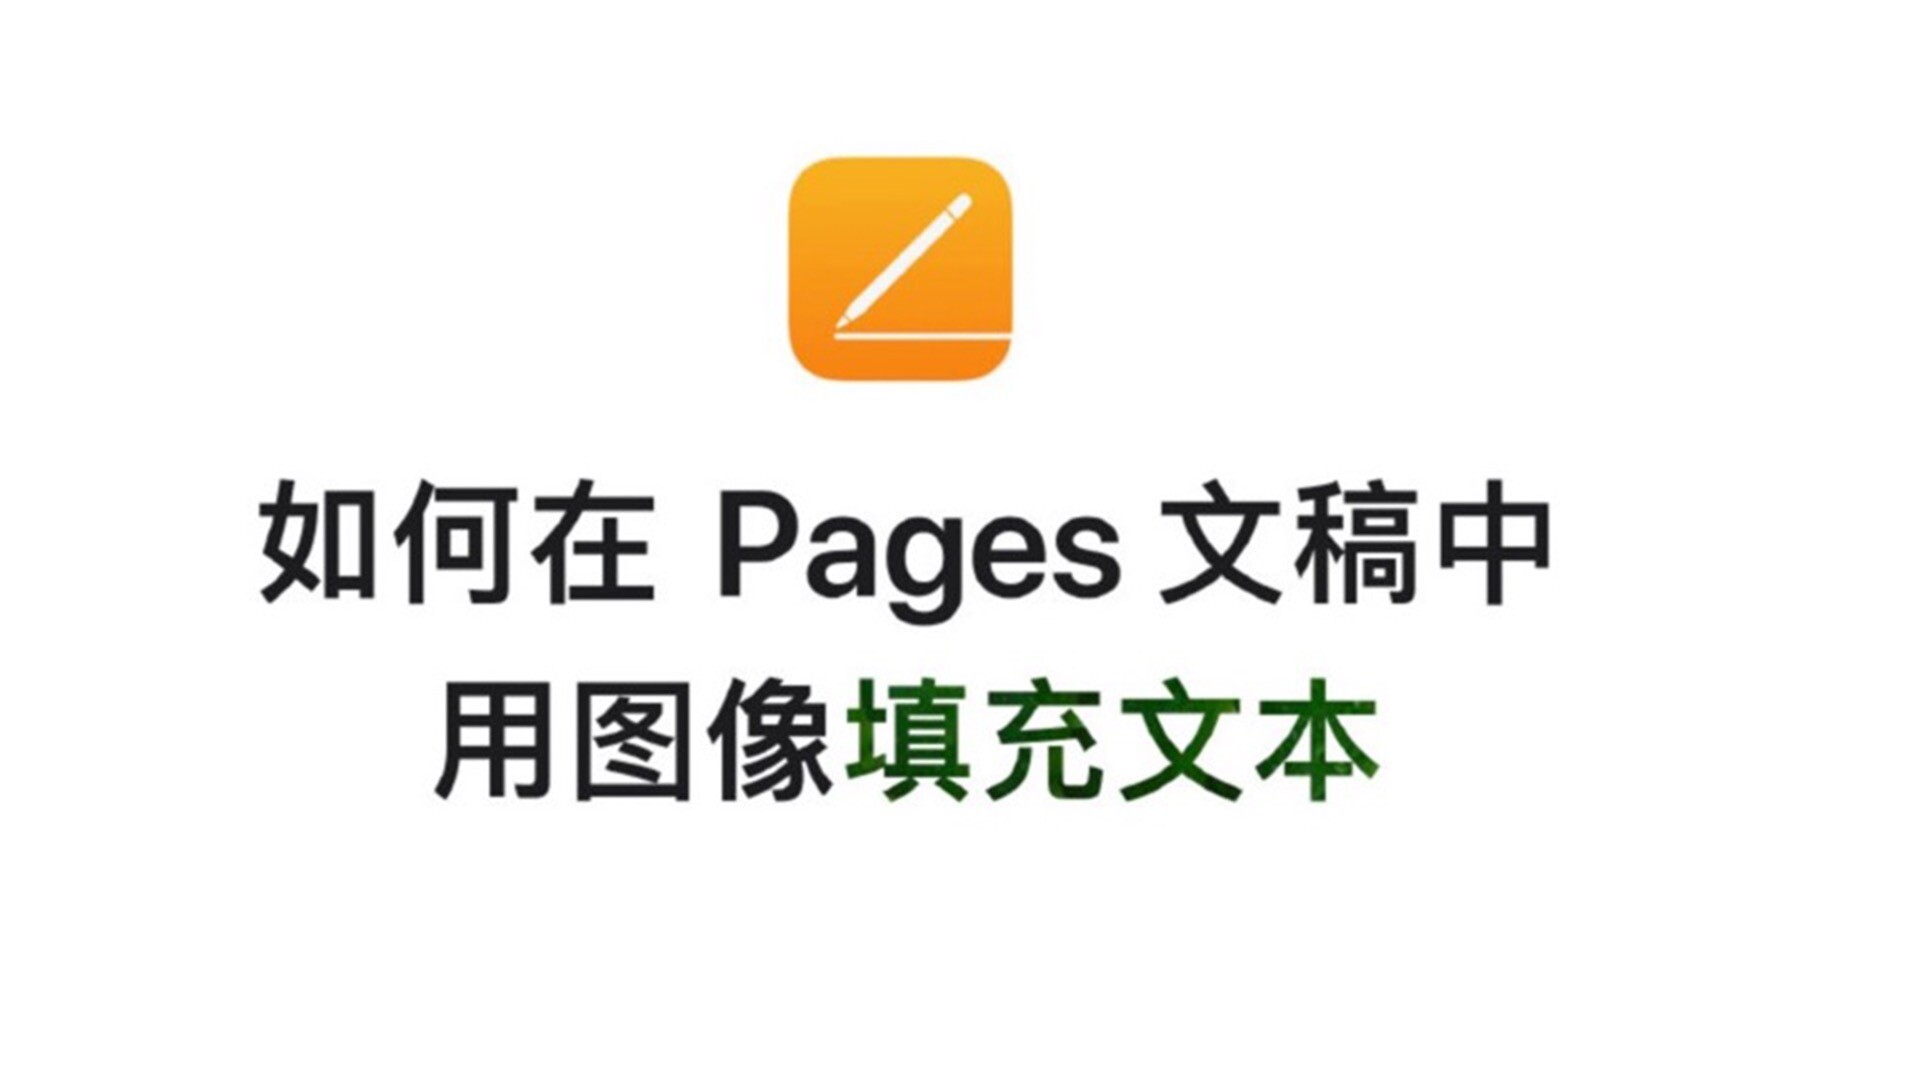 pages使用技巧|如何在pages文稿中用图像填充文本？